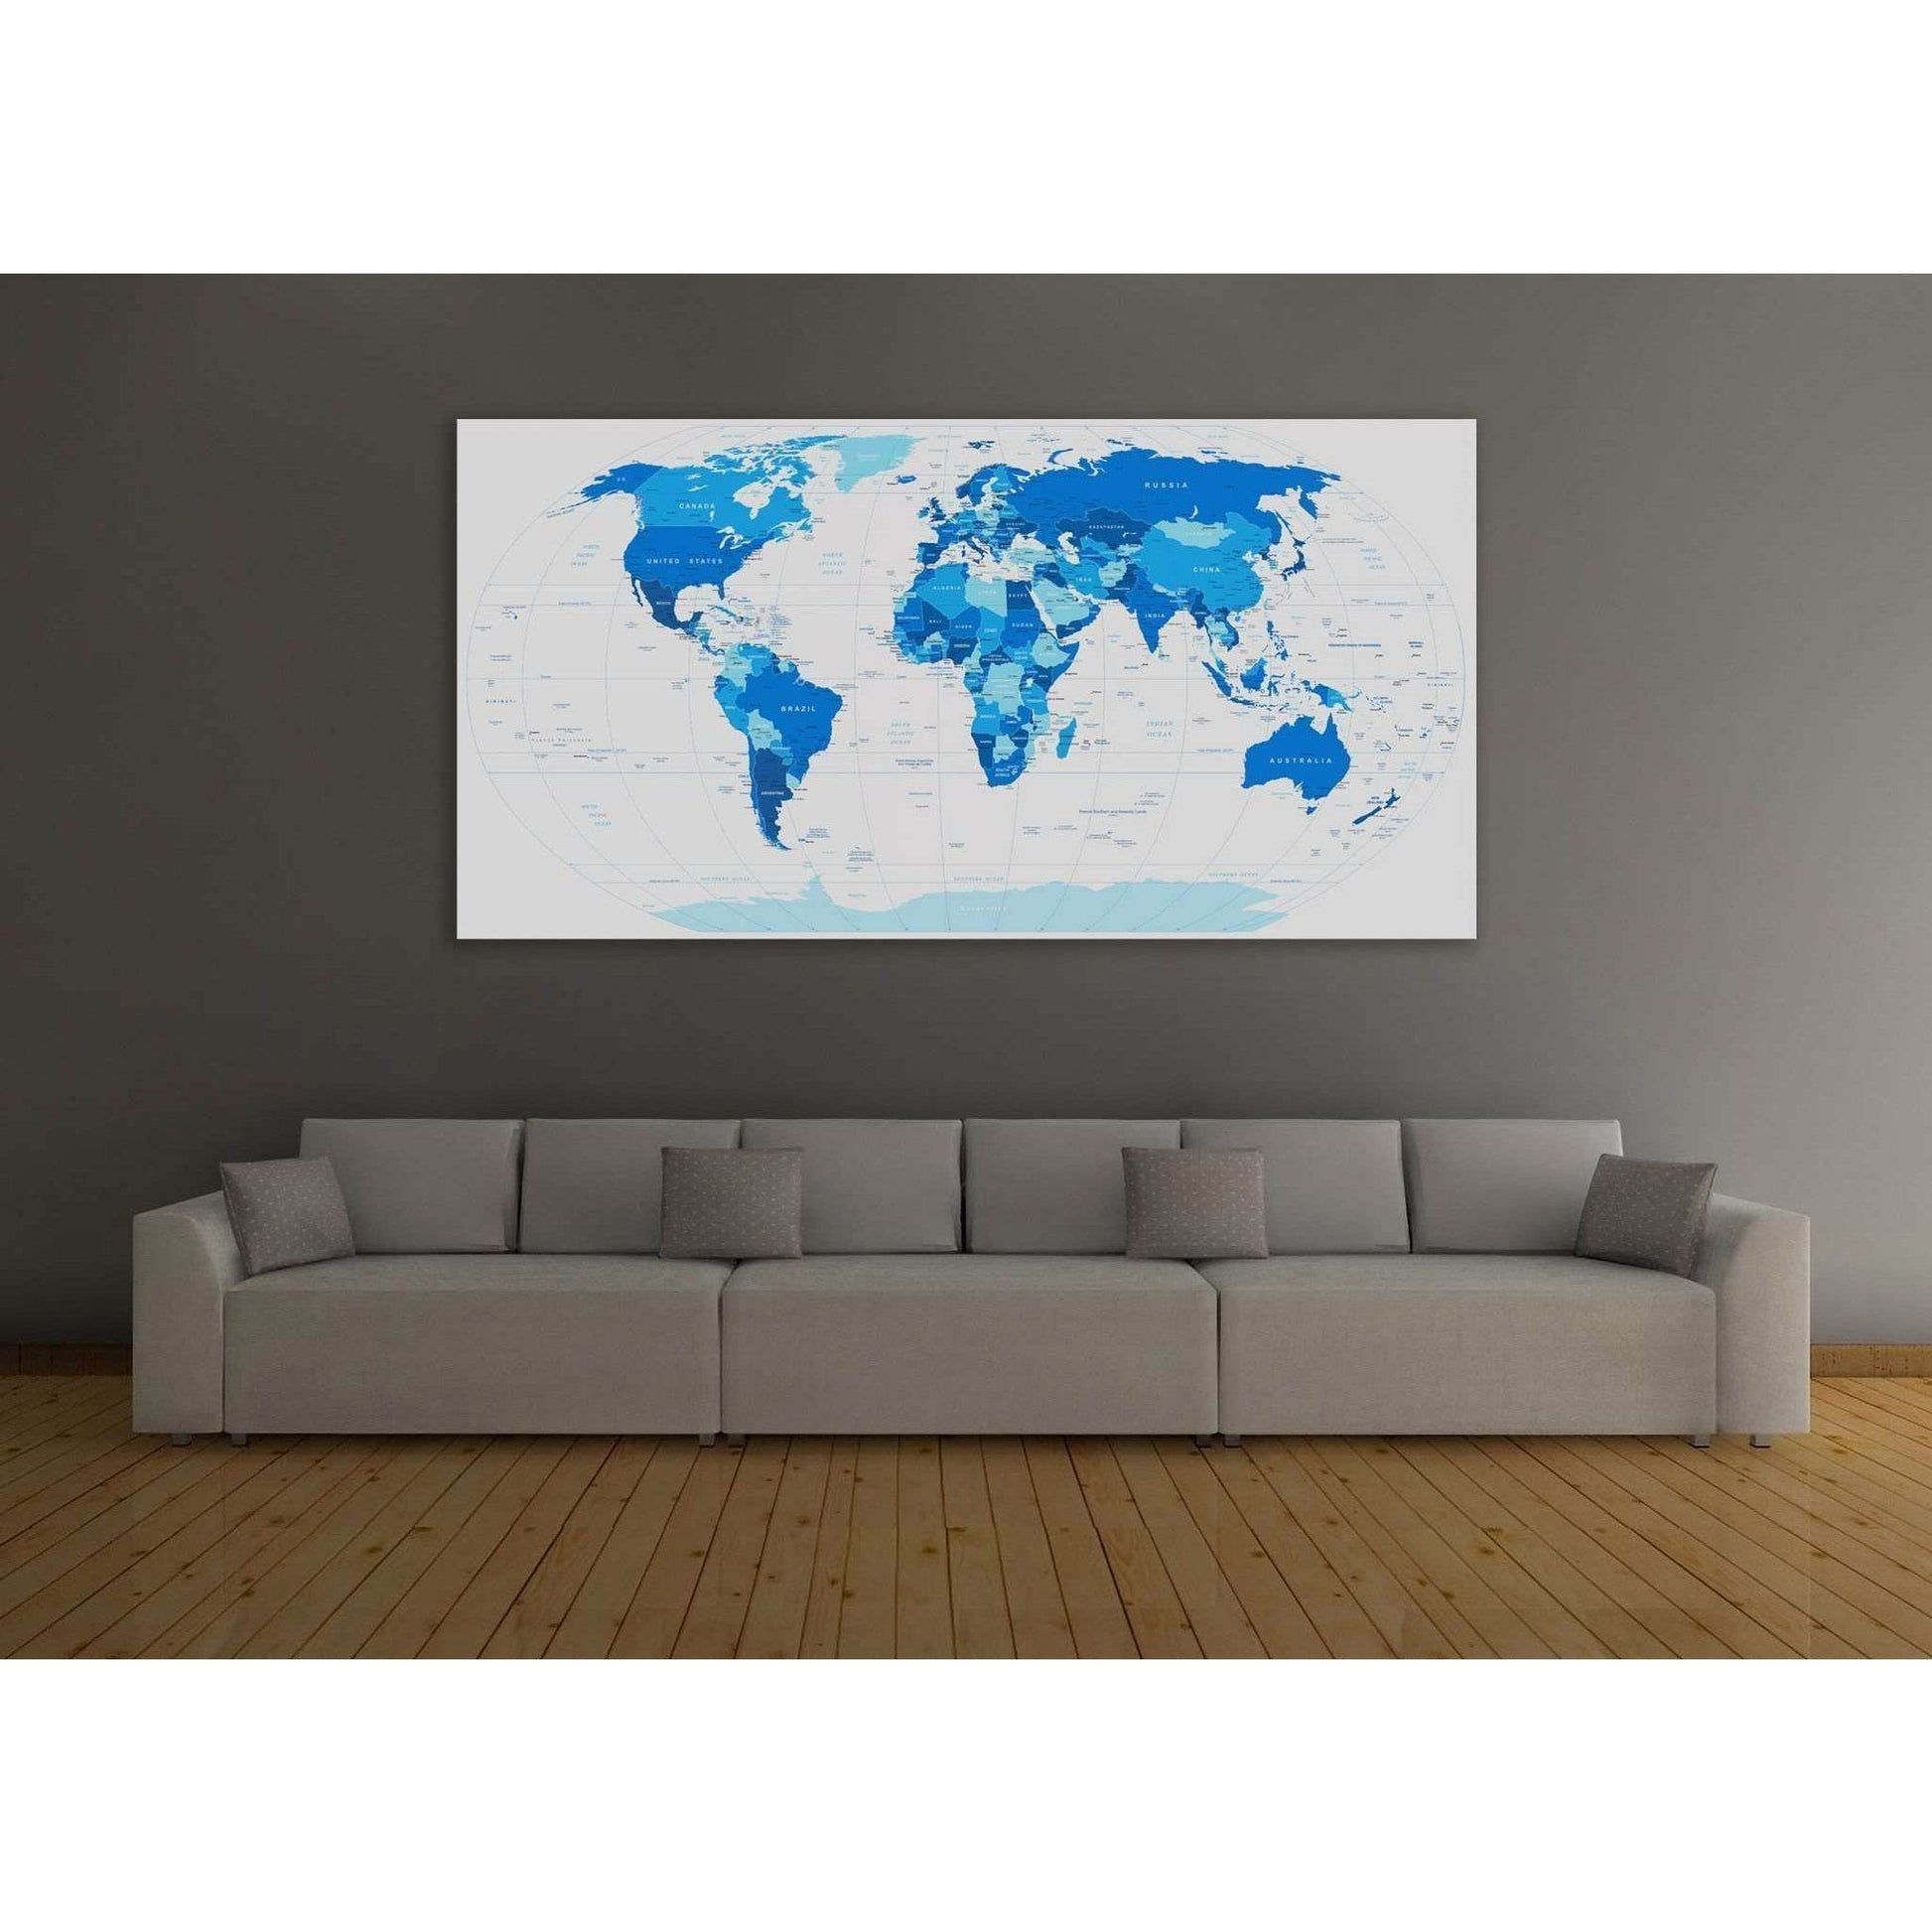 Blue World Map with City labels Canvas Art PrintDecorate your walls with a stunning Blue World Map Canvas Art Print from the world's largest art gallery. Choose from thousands of Map artworks with various sizing options. Choose your perfect art print to c